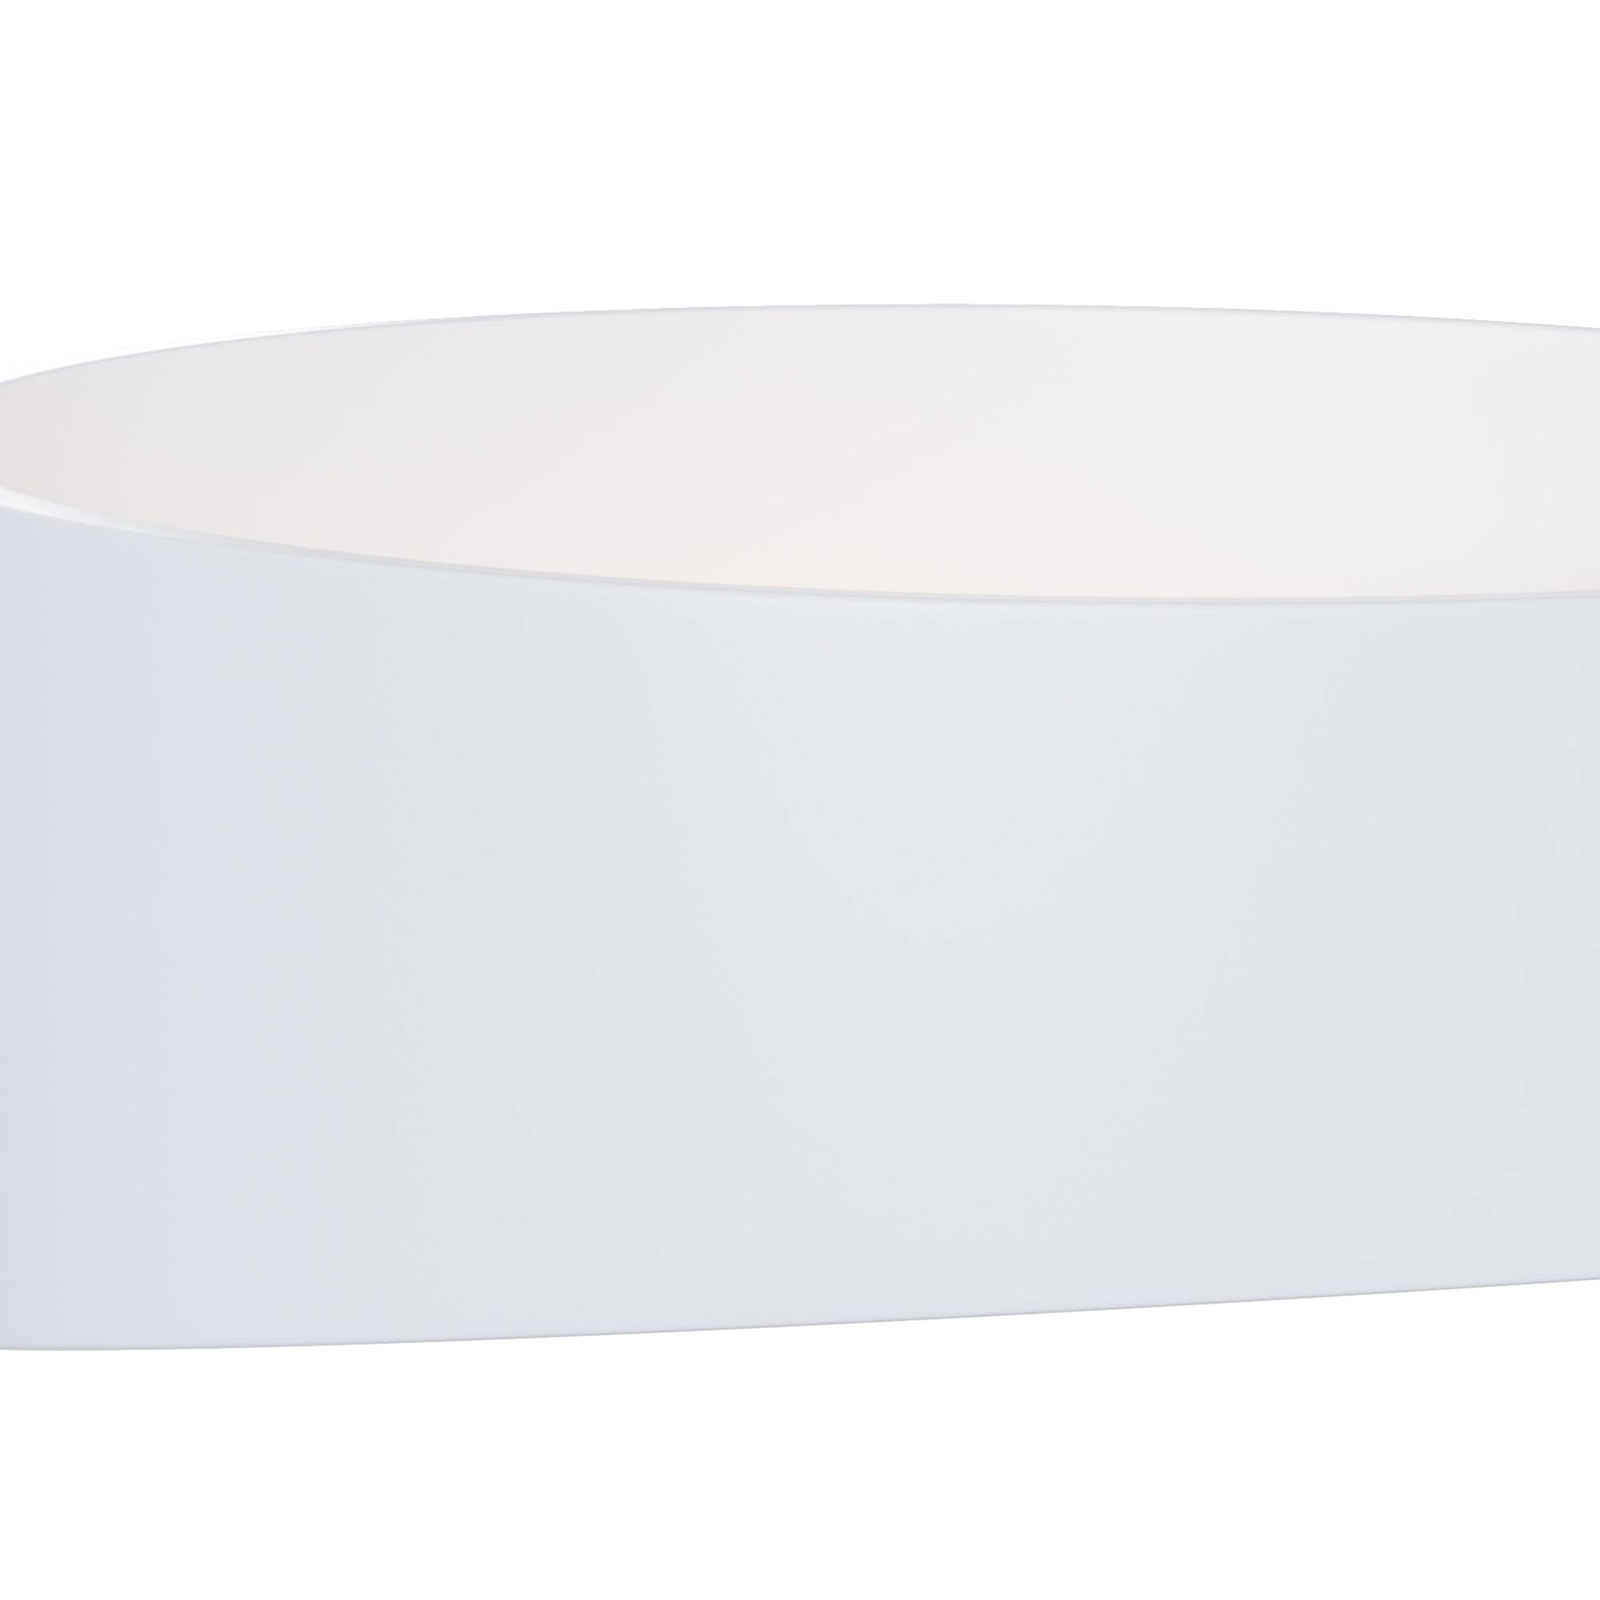 Trame LED wall light, oval shape in white